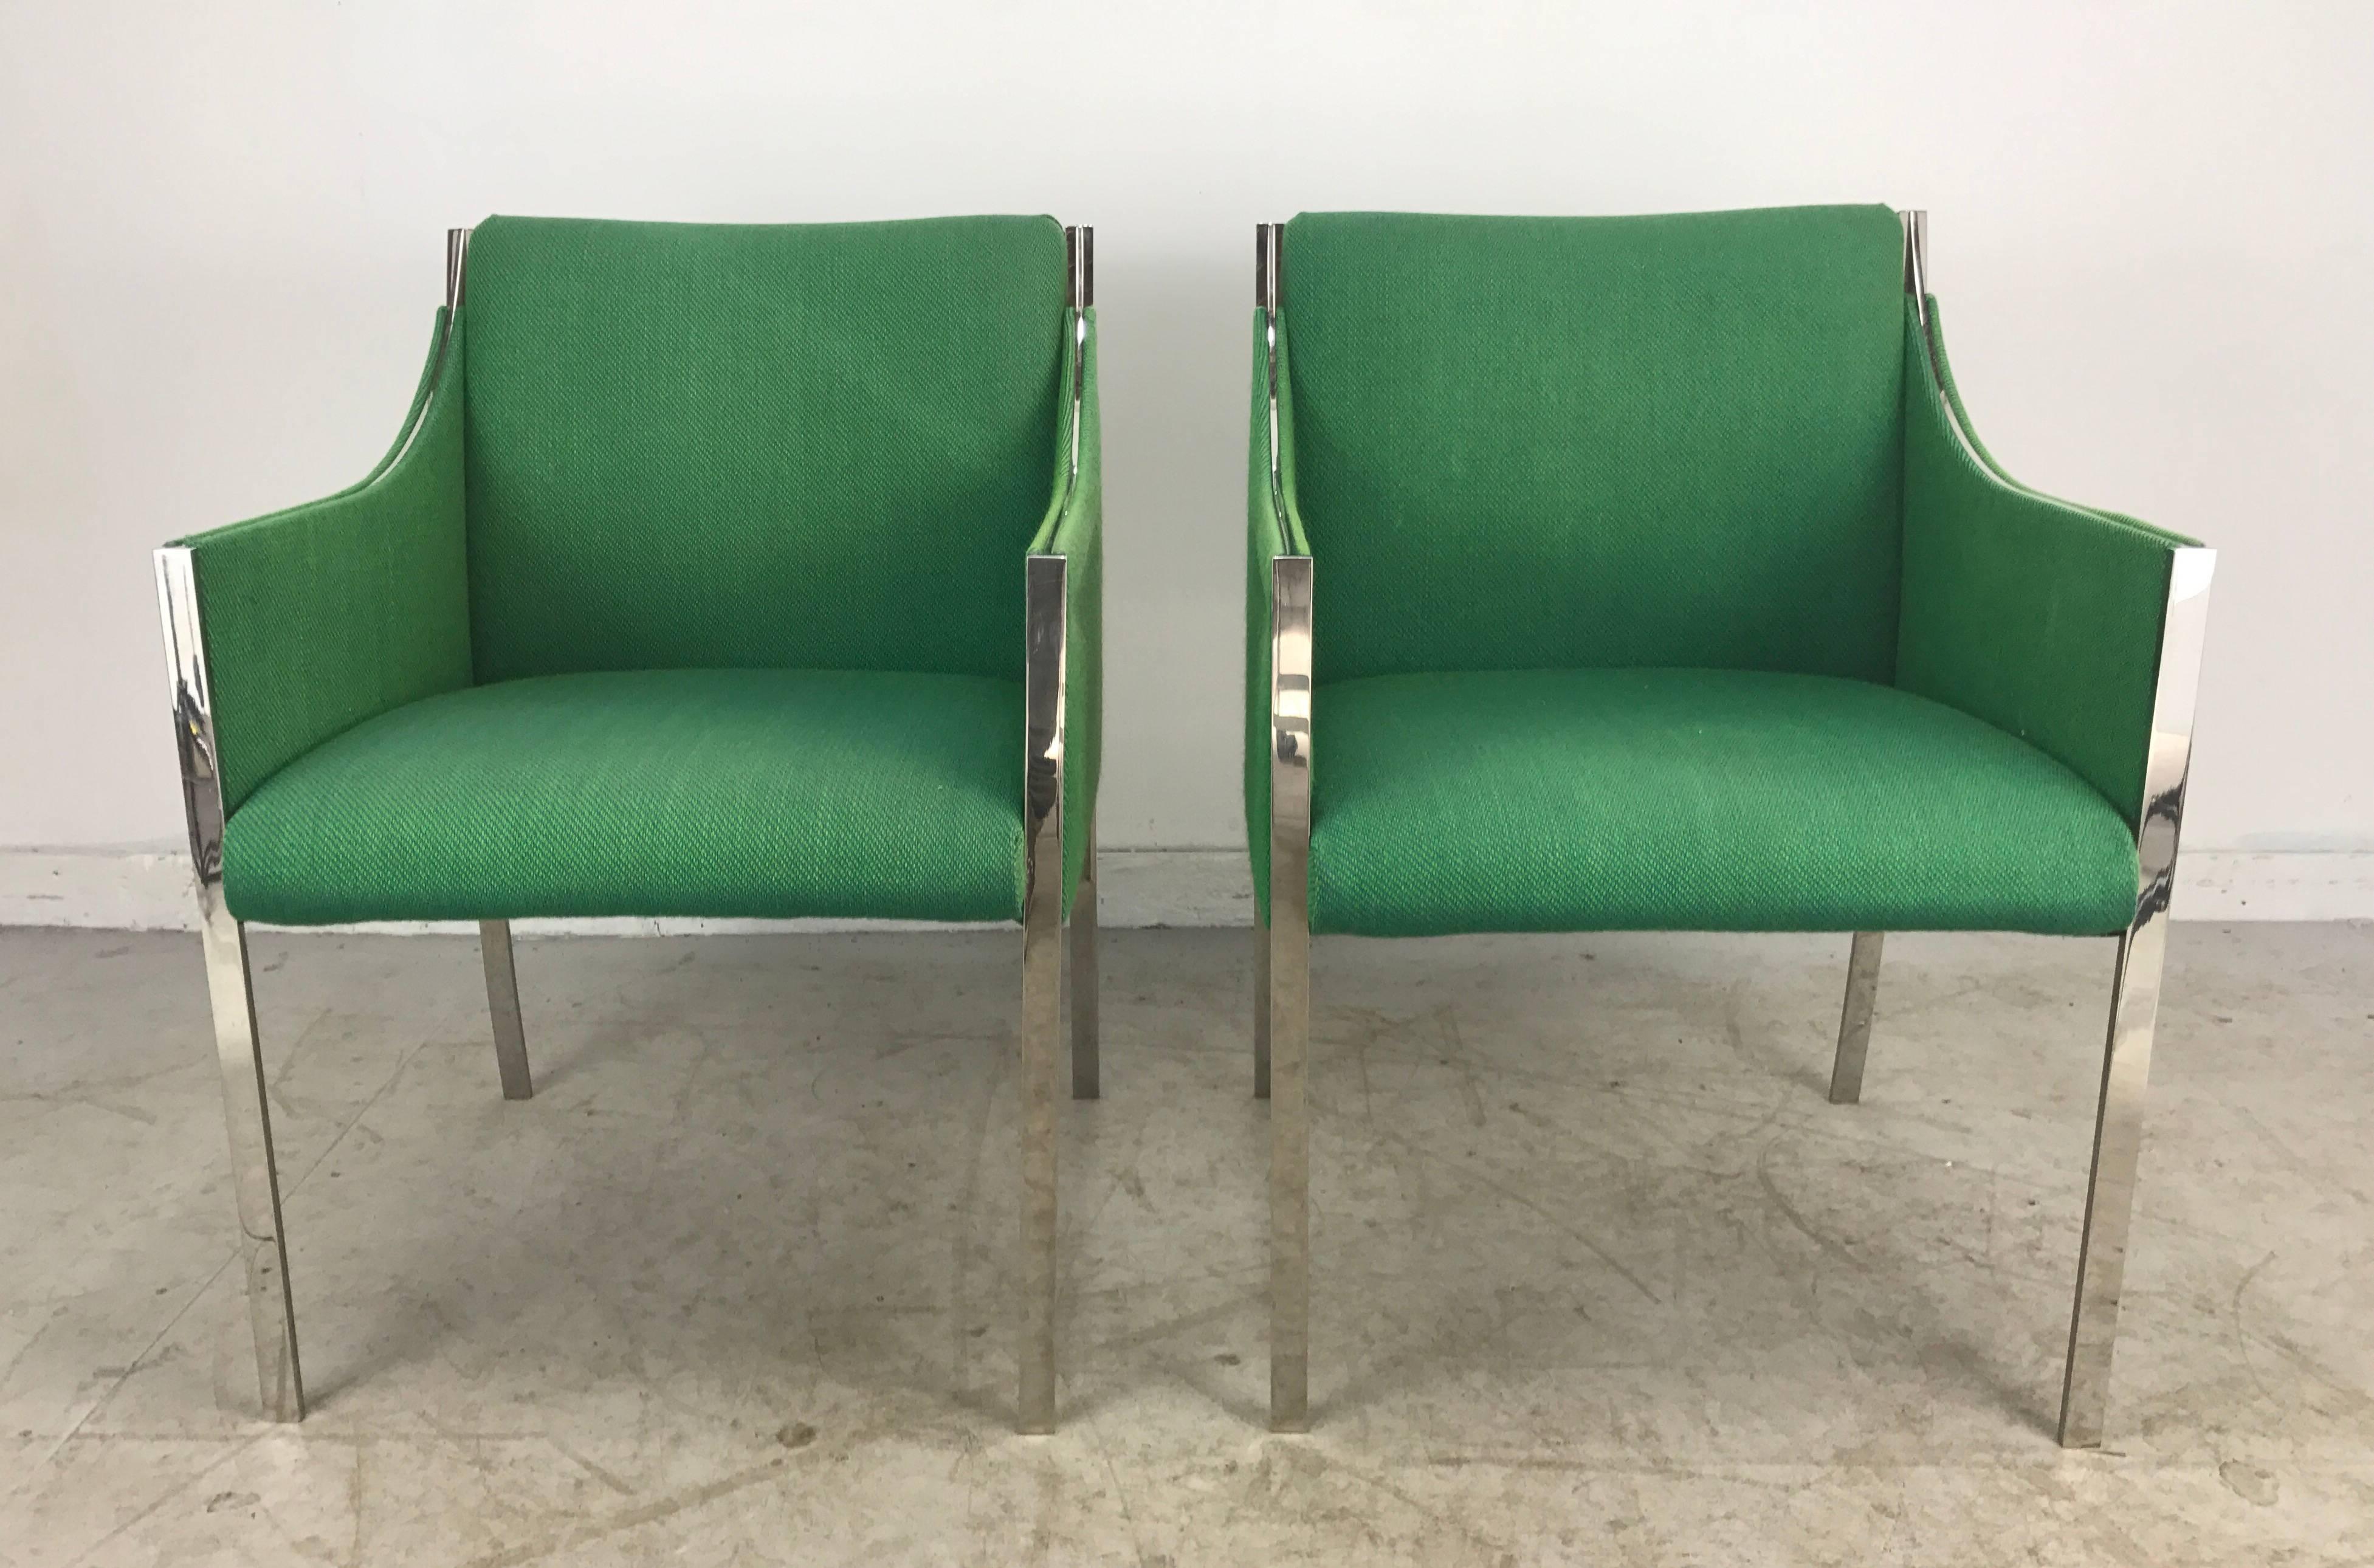 Stunning pair of lounge chairs designed by Jens Risom, stainless steel frames, superior quality, flawless welds, retains original Knoll electric green wool upholstery, stunning.